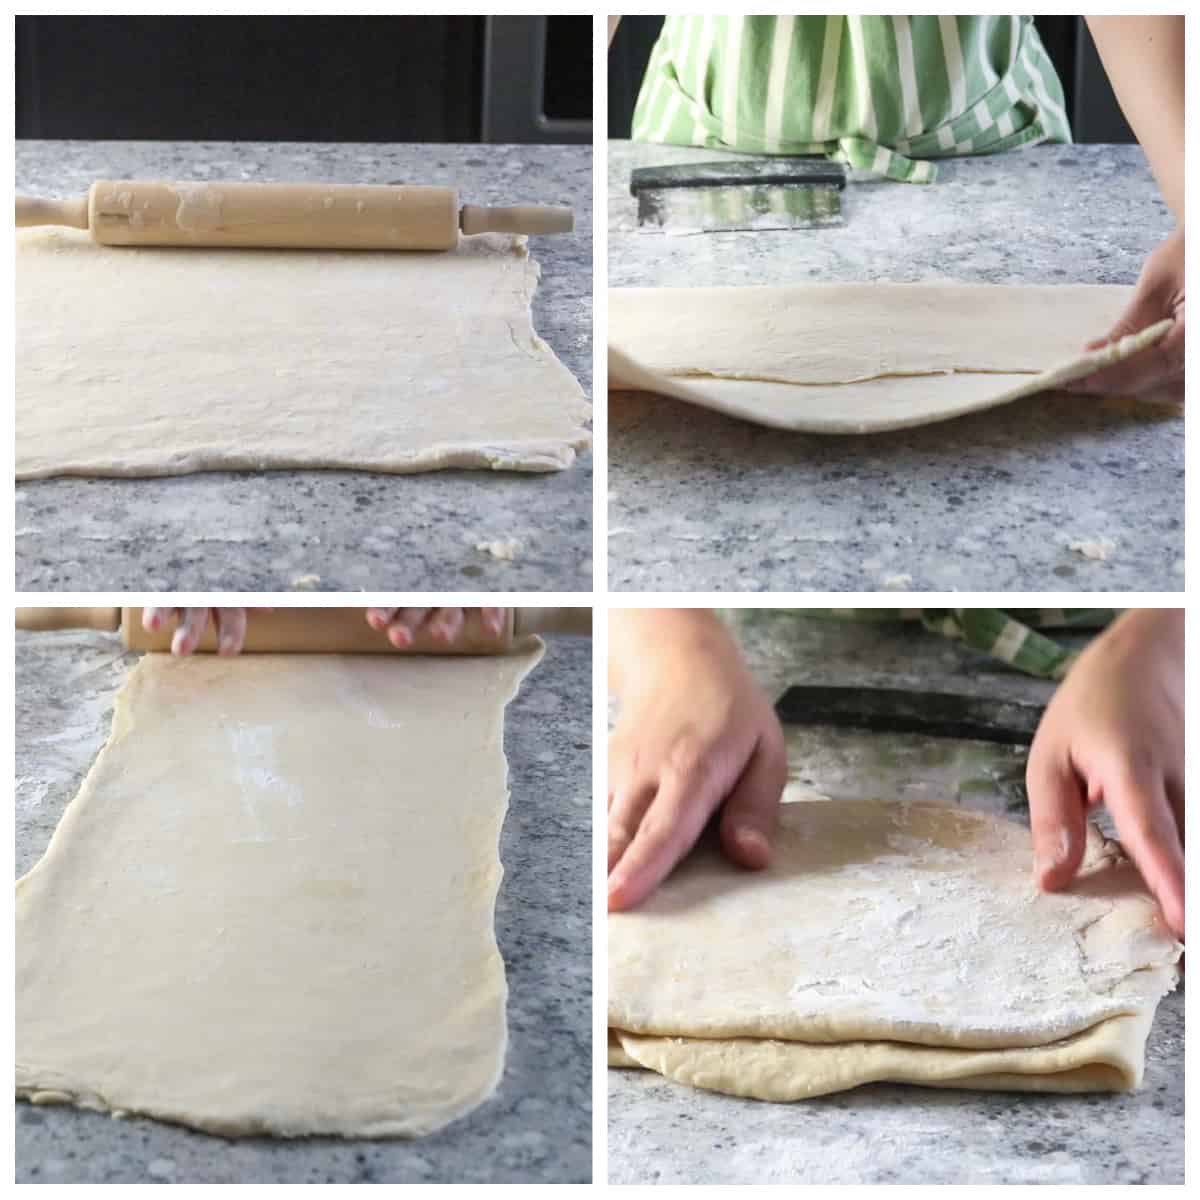 The second series of lamination for the dough.